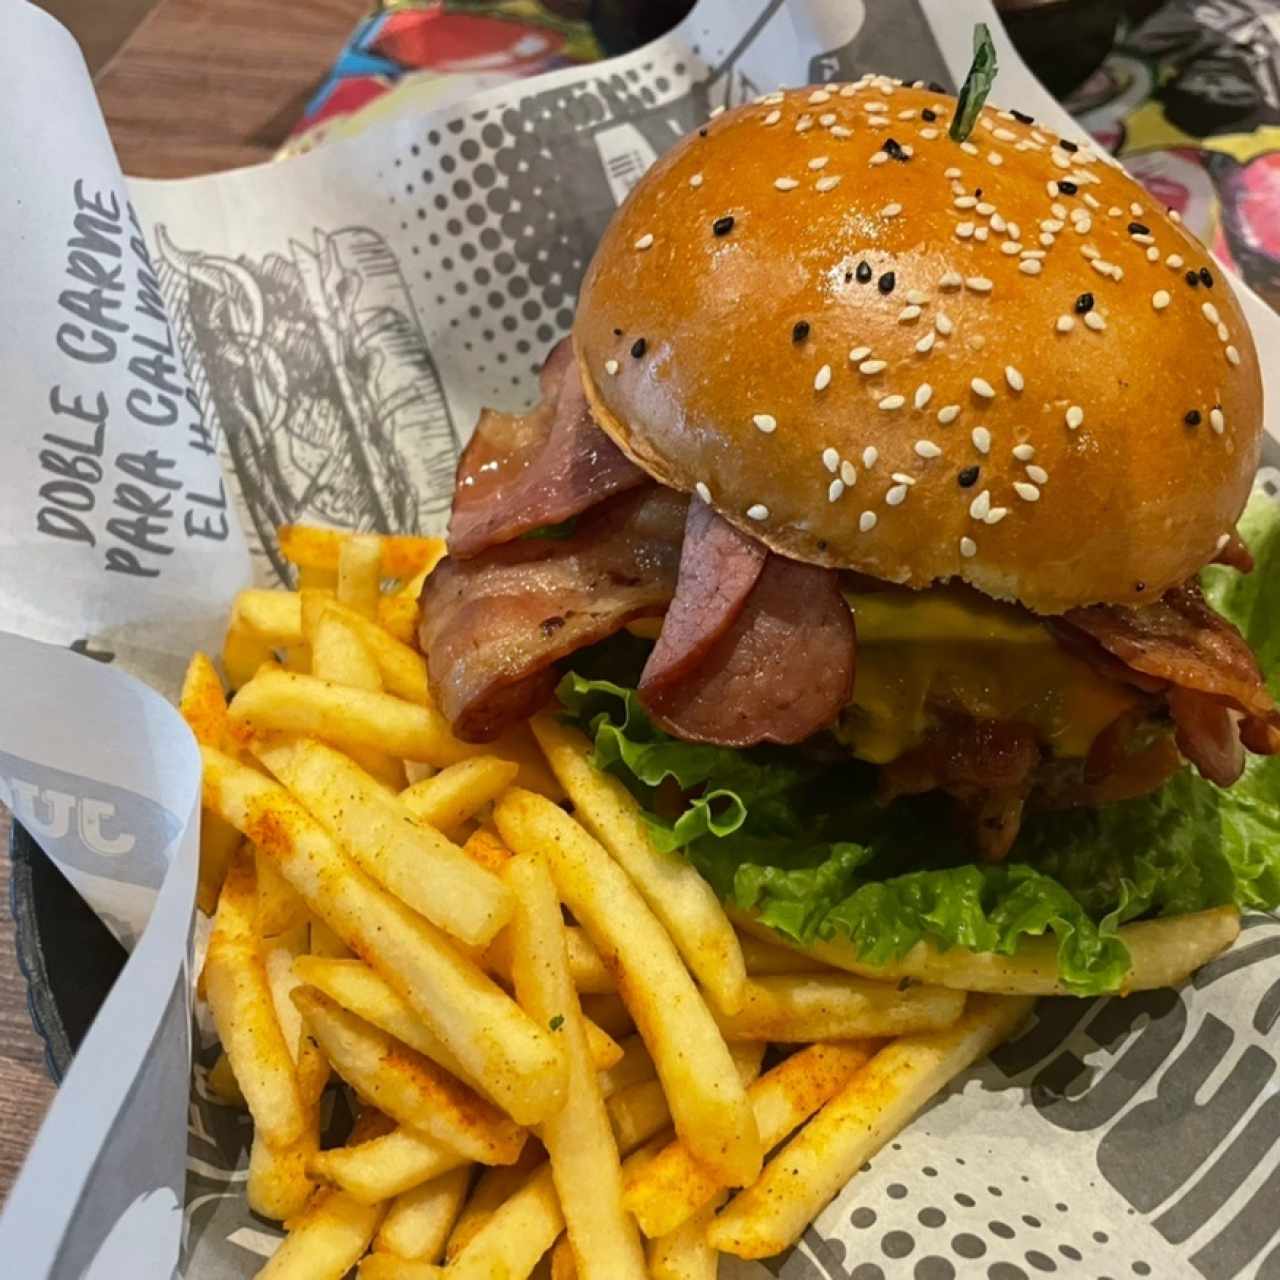 Top Burgers - Bacon Lovers